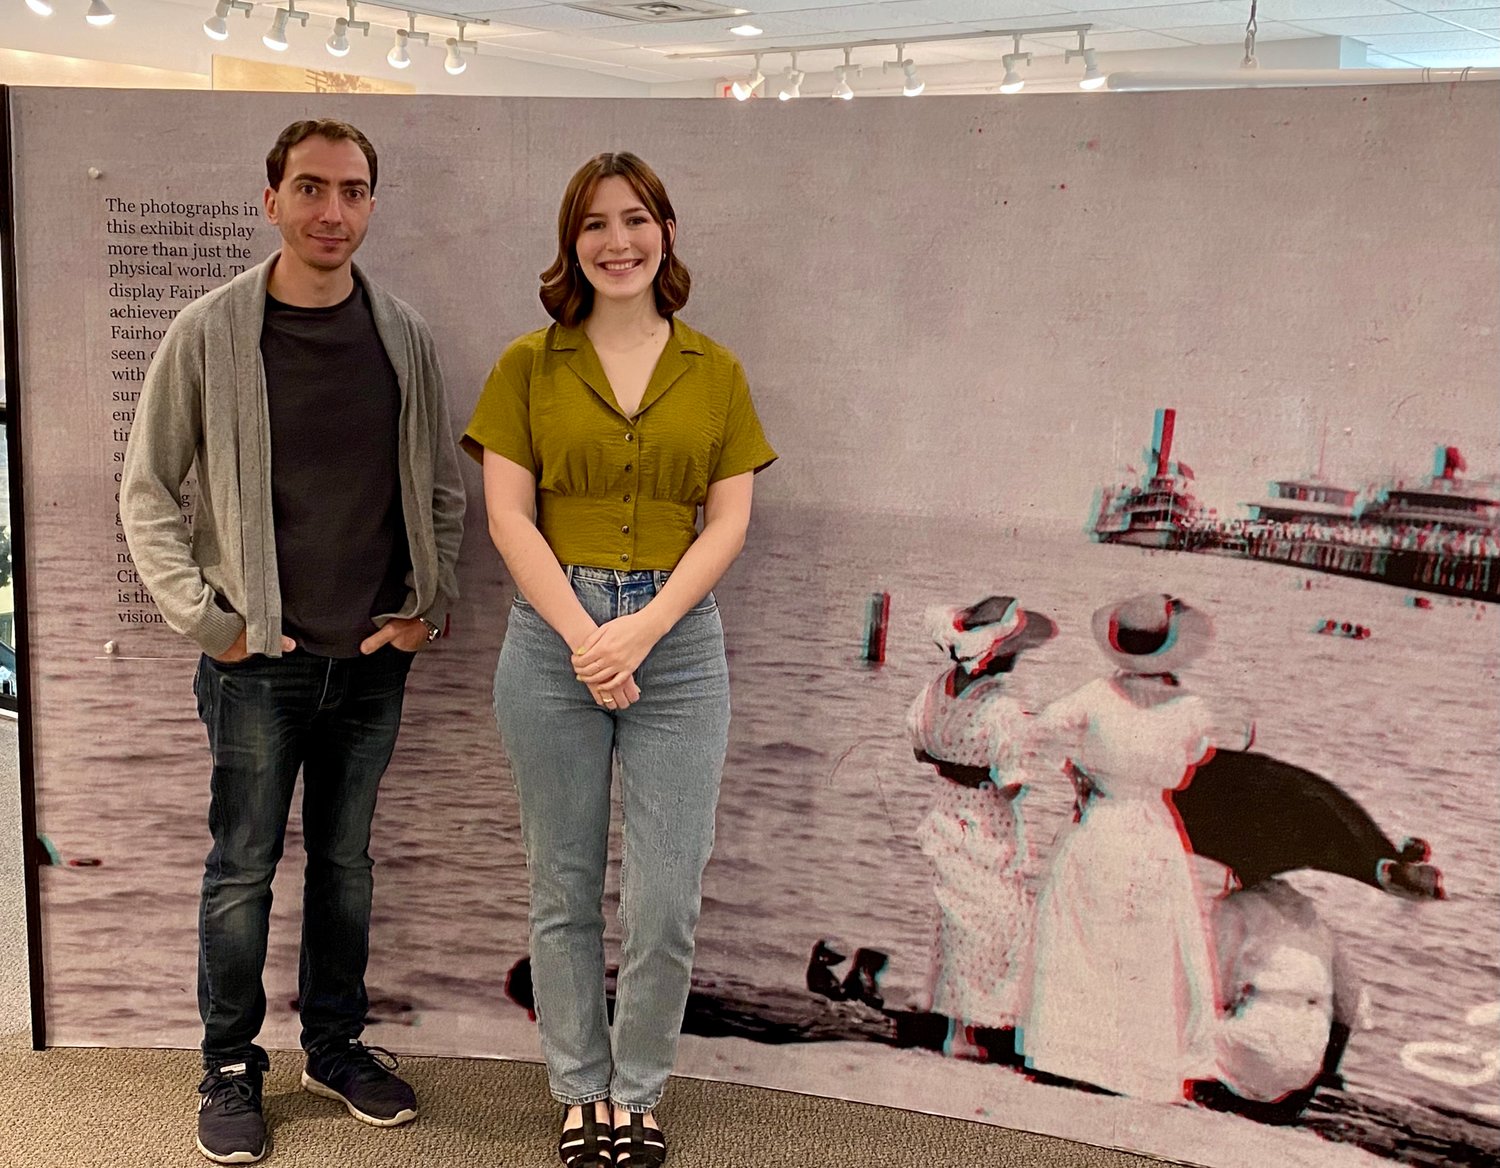 (From left) Gabriel Gold-Vukson, museum director, and Alex Box, museum assistant, stand in front of the largest 3D photo in the "Visions of a Fairhope" exhibit.